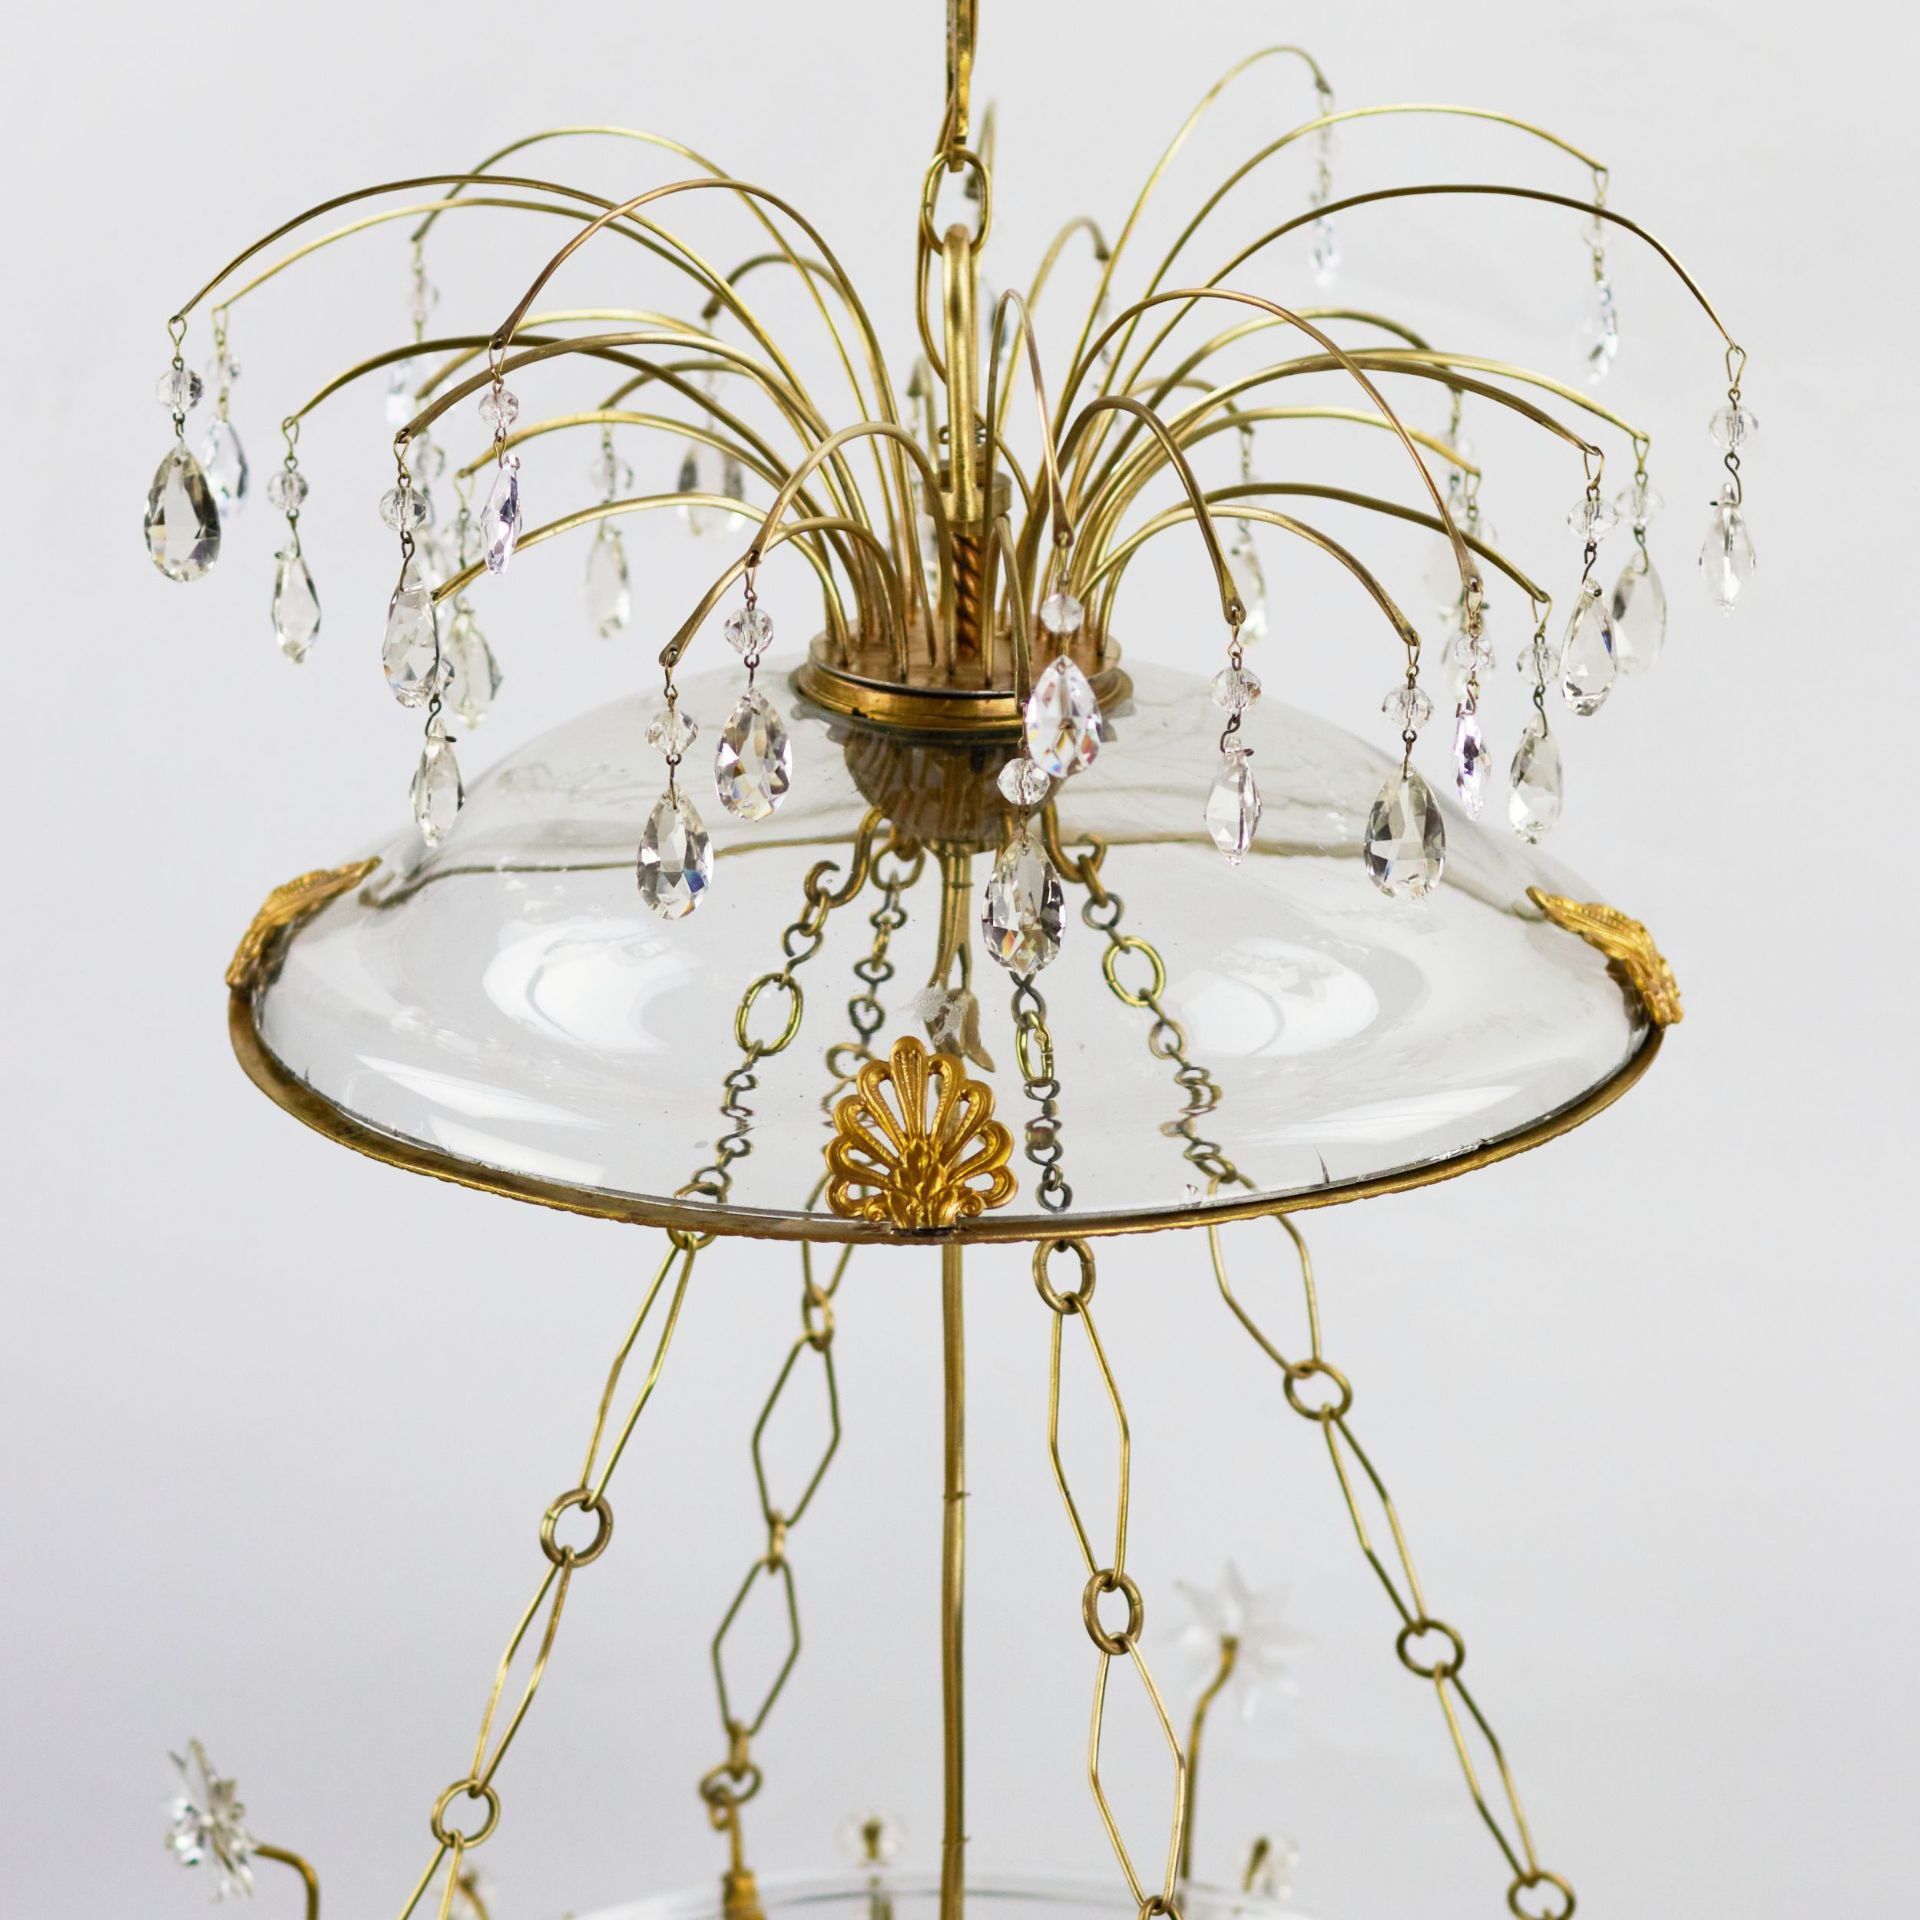 Russian Crystal & Ormolu Mounted Two-Light Lantern Chandelier.Russia, early 19th century. - Image 4 of 5